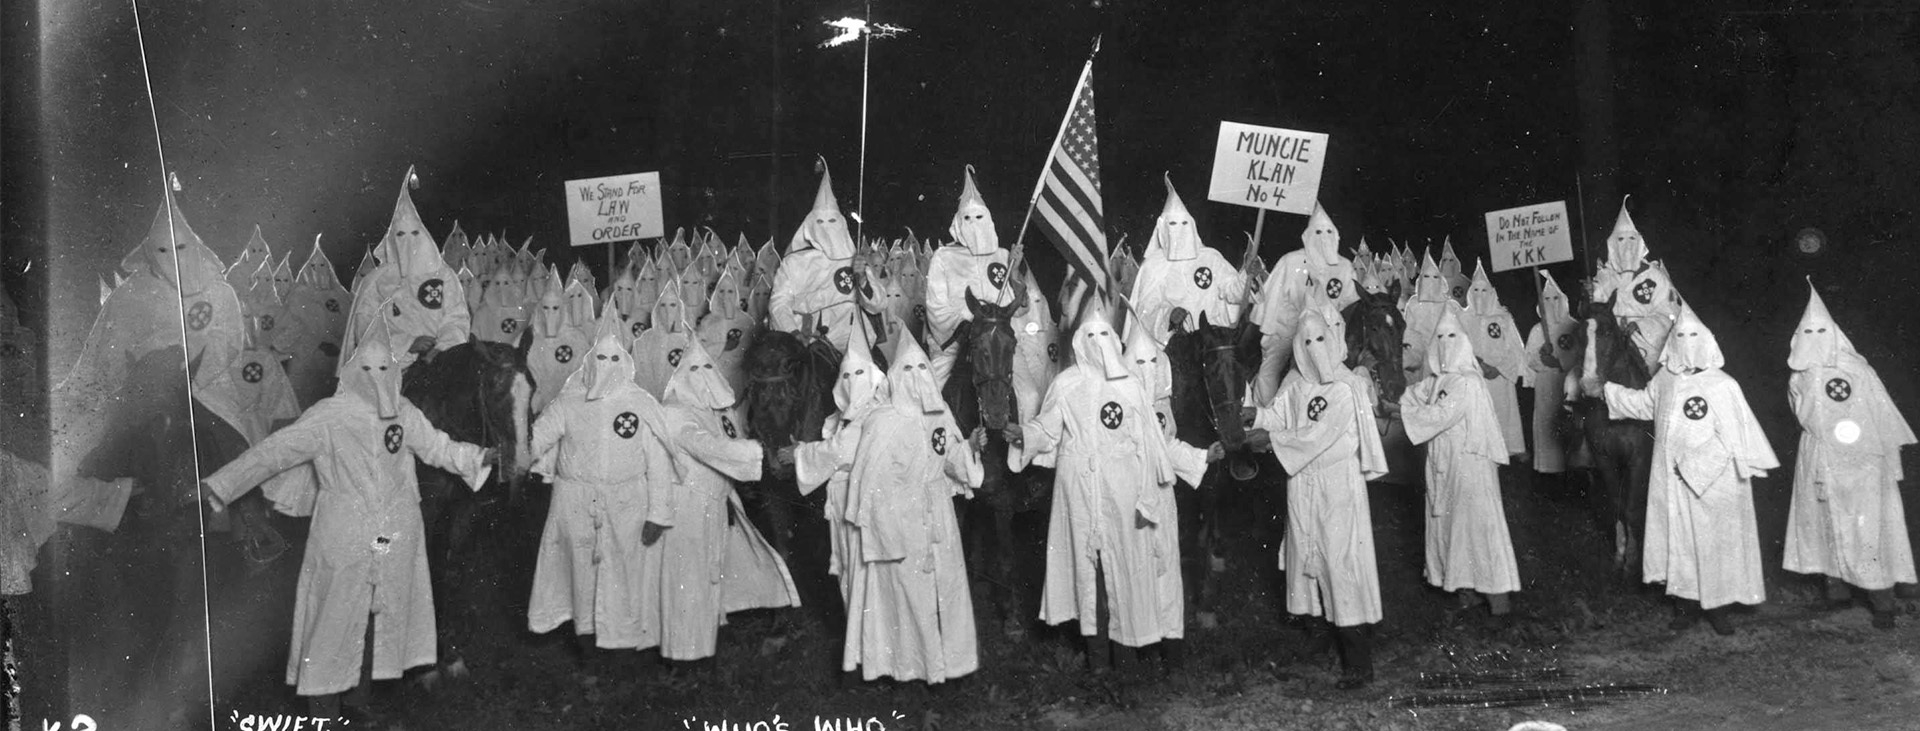 Robed and hooded Klan members hold signs and the American flag. Signs say: “We stand for law and order;” “Muncie Klan No. 4;” “Do not follow in the name of the KKK.” Written on image: “Who's who” and “K-2.”